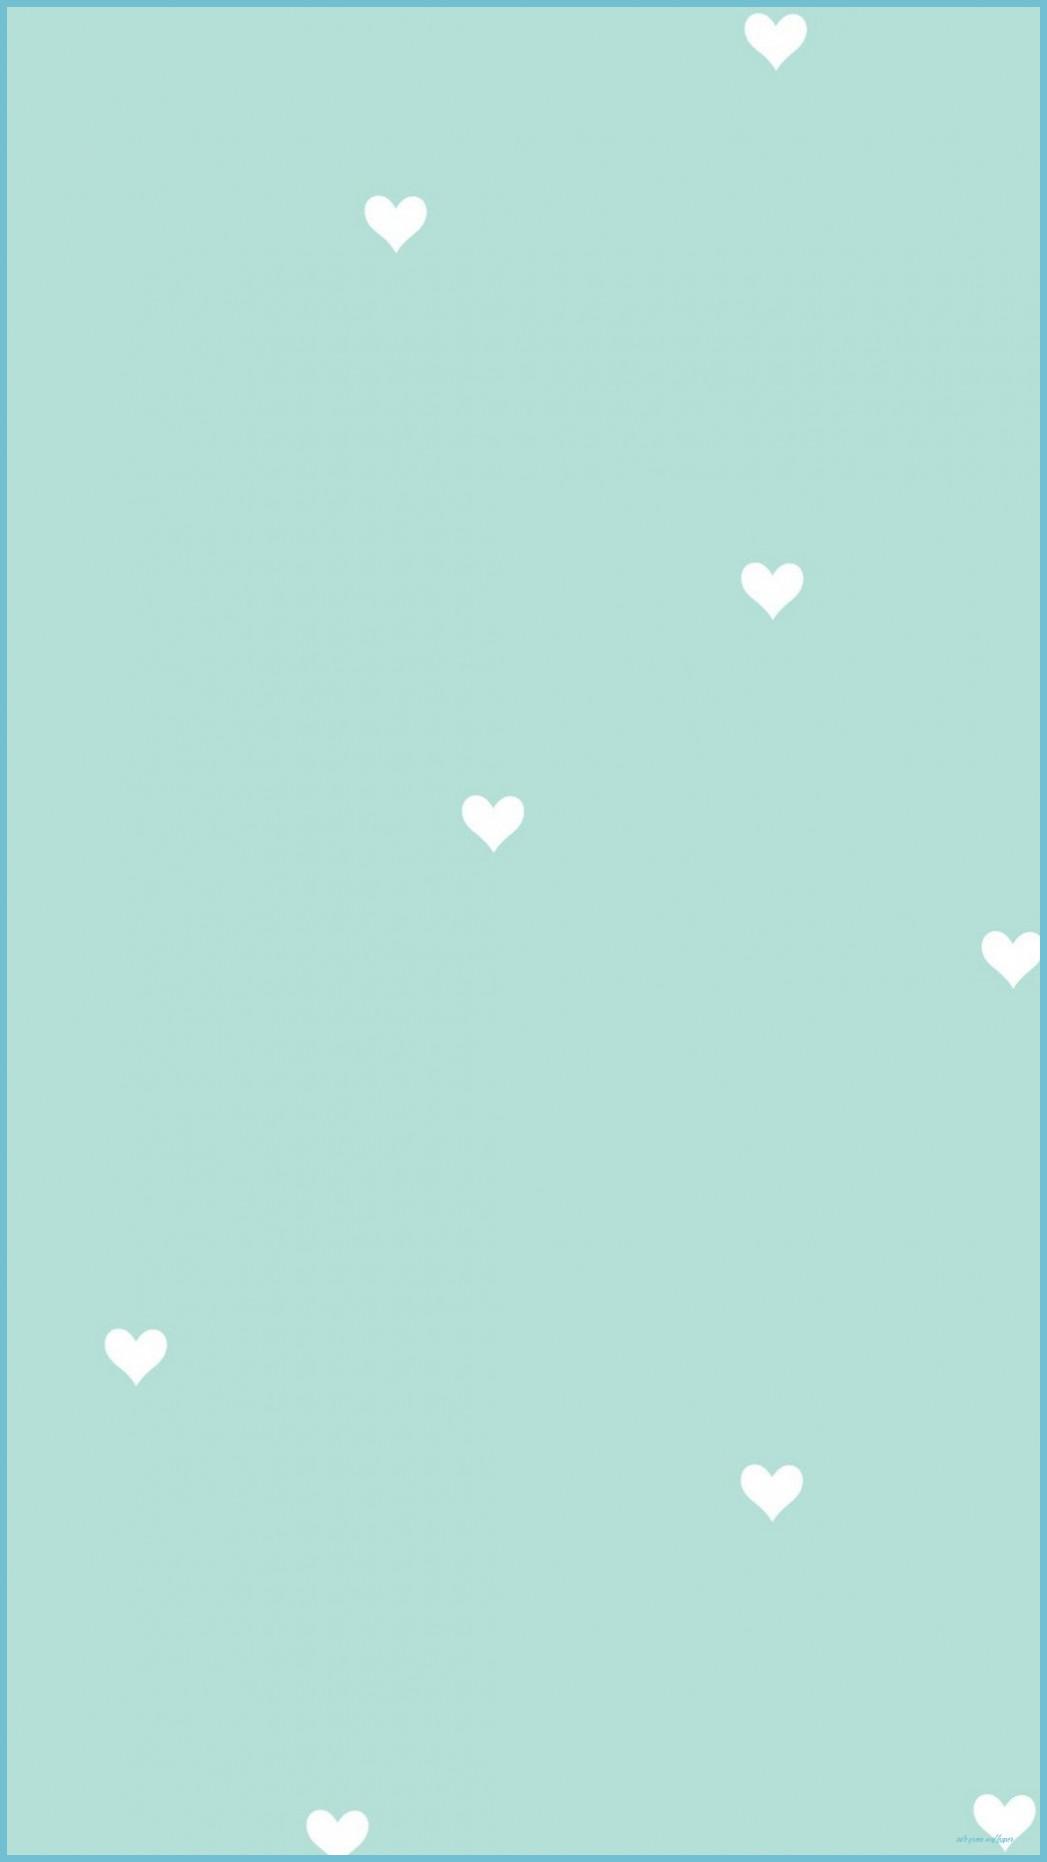 Mint Green Phone Wallpapers - Top Free Mint Green Phone Backgrounds ...